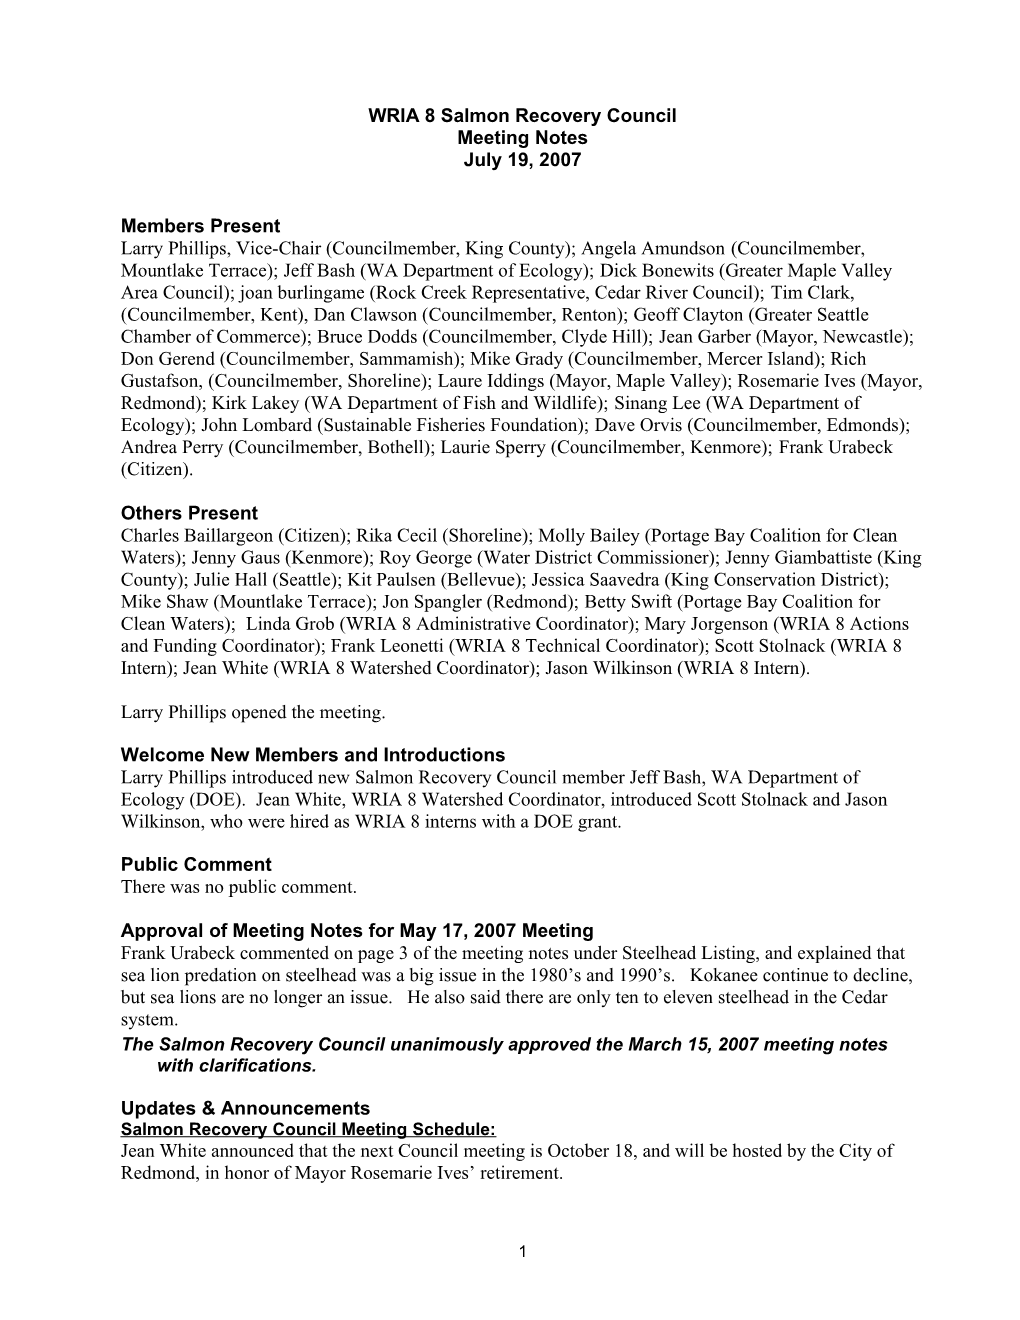 WRIA 8 Salmon Recovery Council Meeting Summary 7/19/07